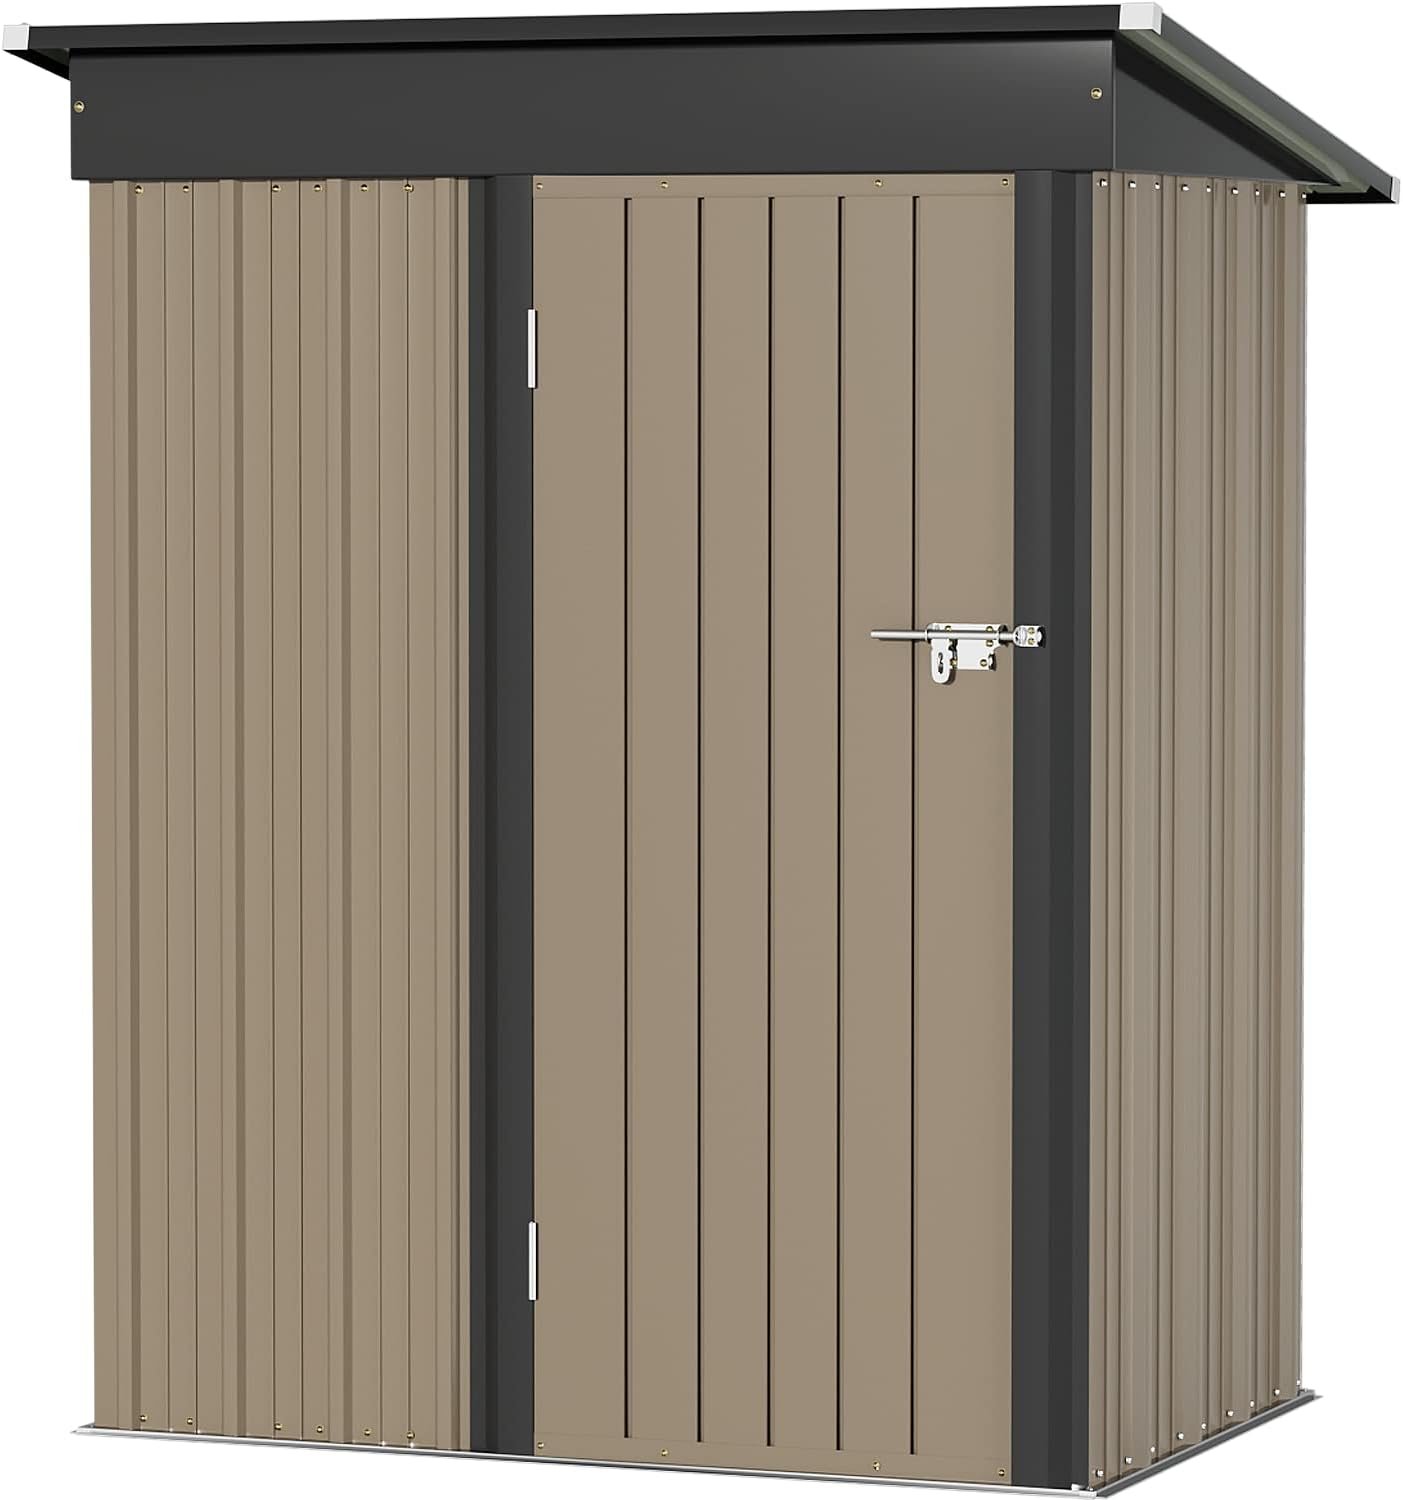 Greesum Metal Outdoor Storage Shed 5FT x 3FT, Steel Utility Tool Shed Storage House with Door  Lock, for Backyard Garden Patio Lawn (5 x 3), Brown